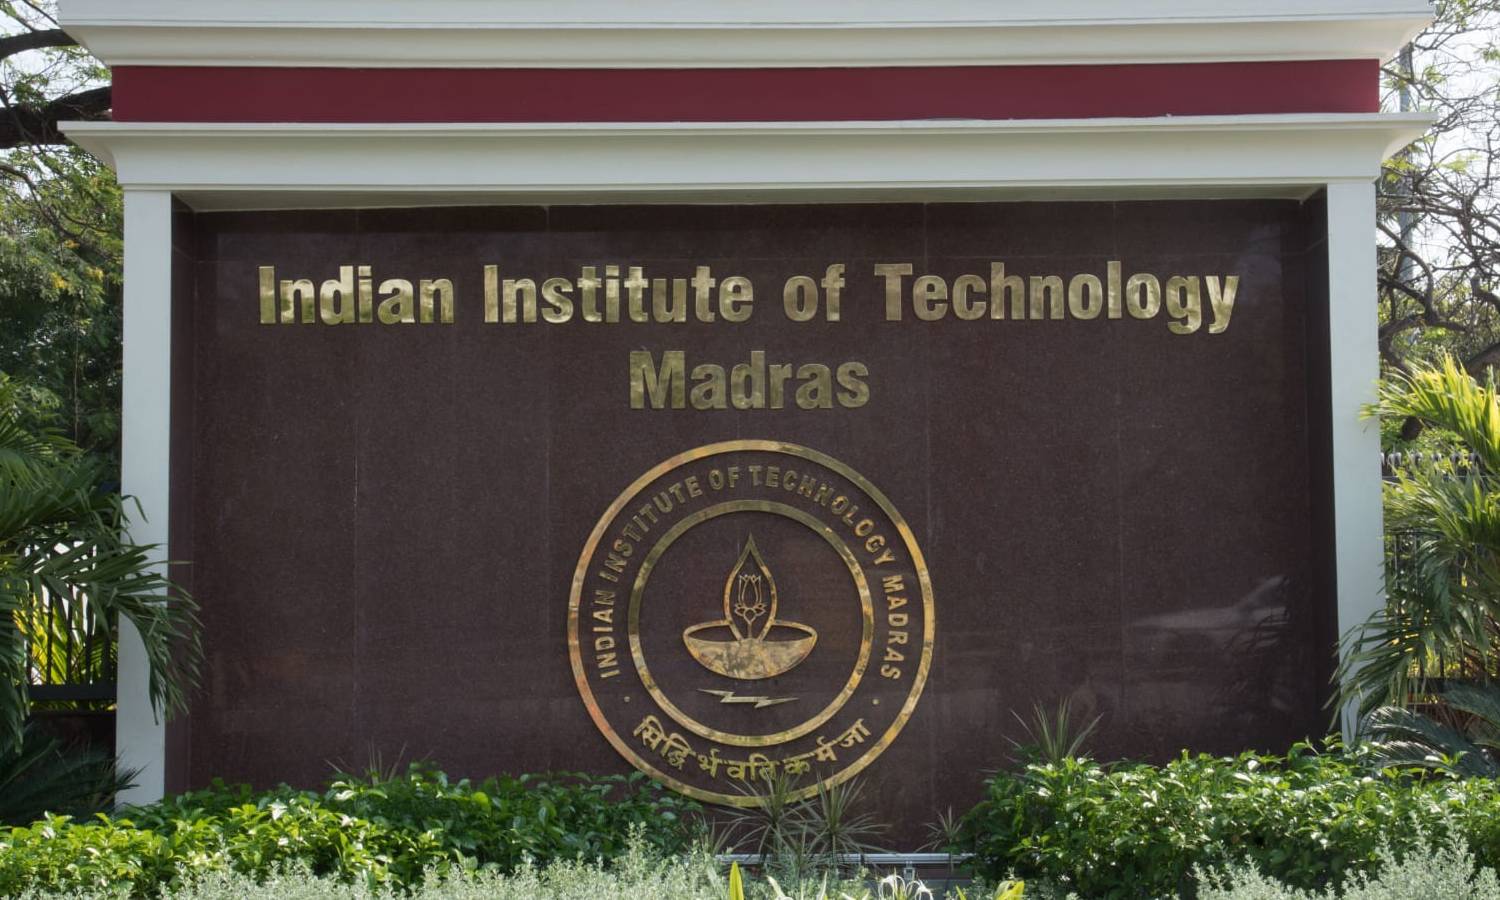 IIT-M develops portable tool to detect heavy metals in water and soilThe Indian Institute of Technology Madras (IIT-M) on Tuesday announced that...